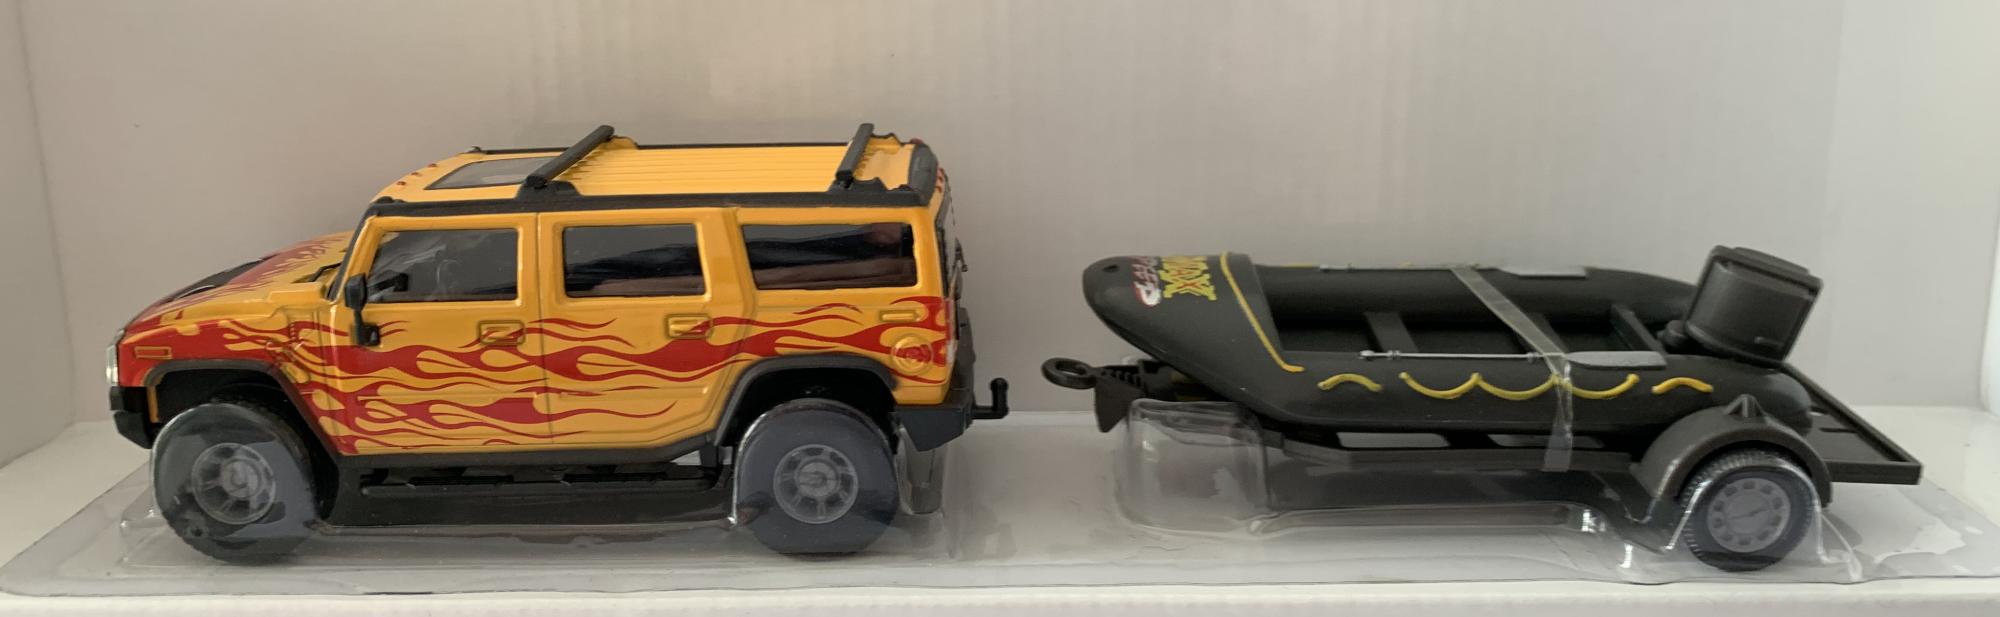 Hummer in yellow with red flame effect and inflatable style boat in grey  on trailer